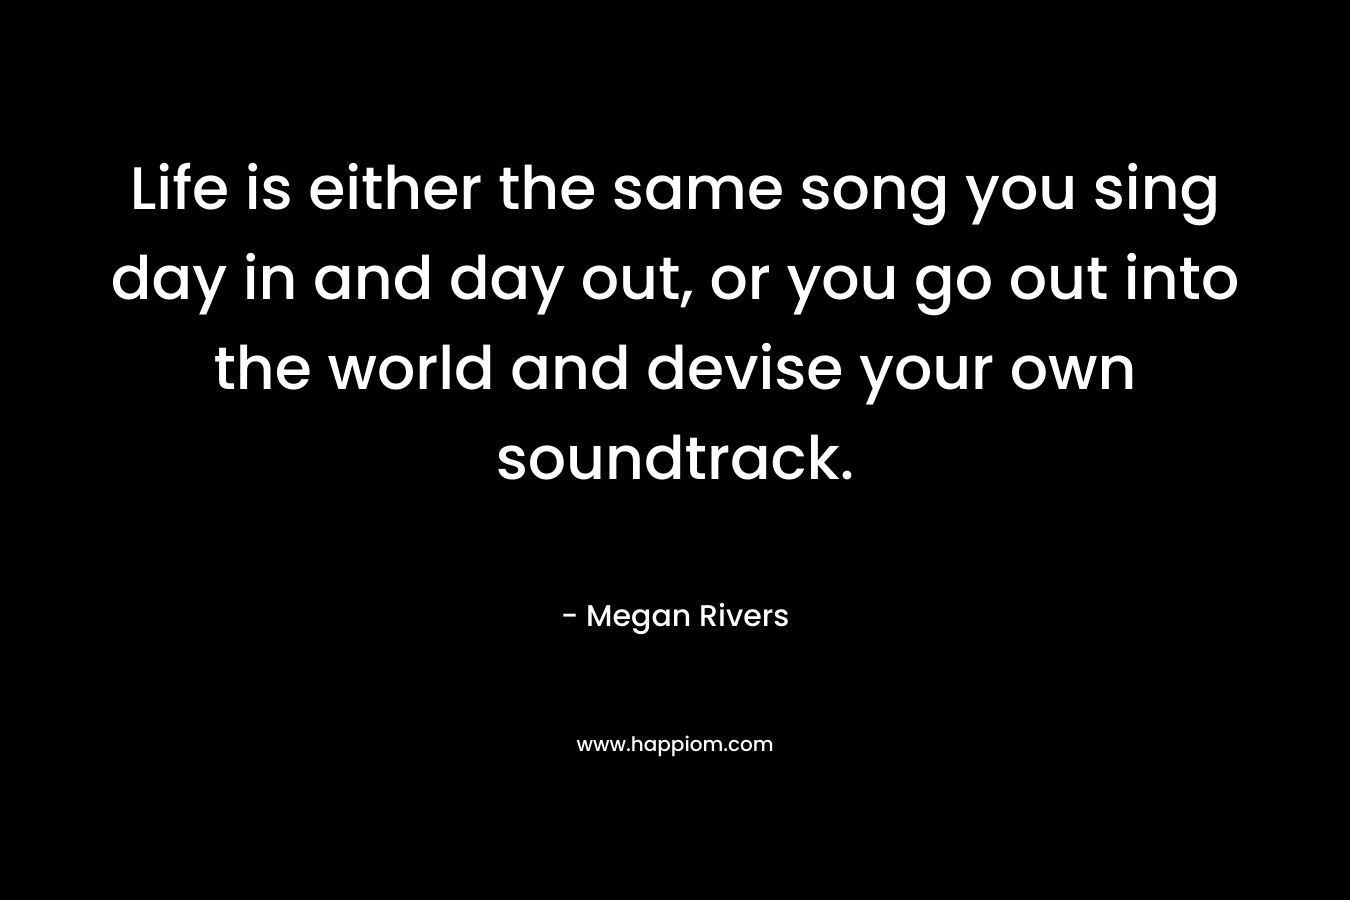 Life is either the same song you sing day in and day out, or you go out into the world and devise your own soundtrack. – Megan Rivers